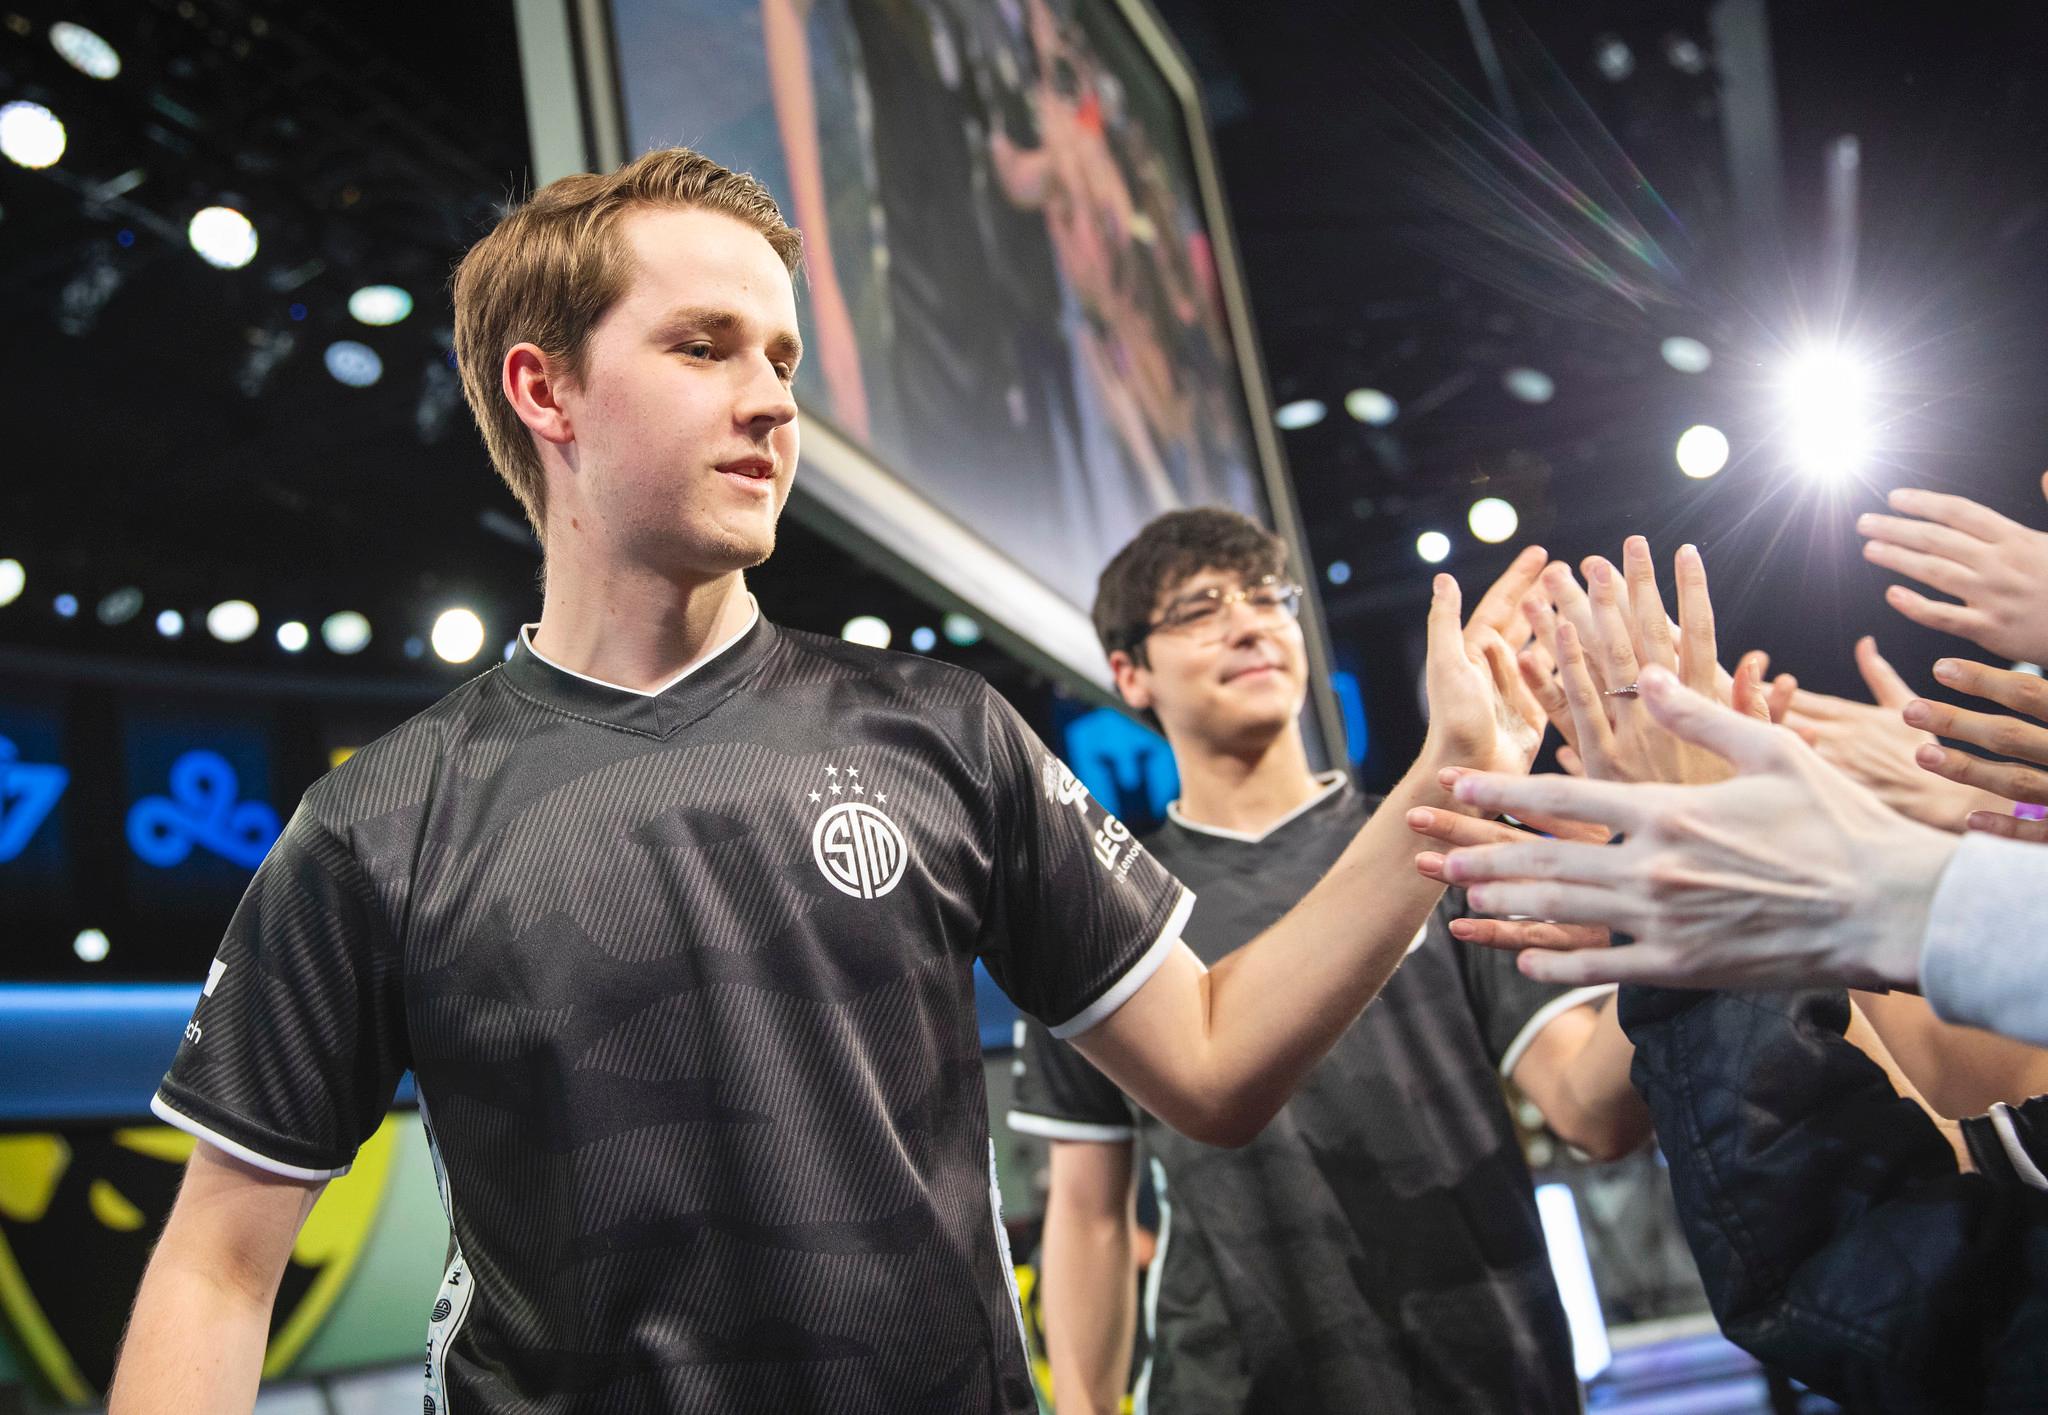 Kobbe high fiving TSM fans during LCS